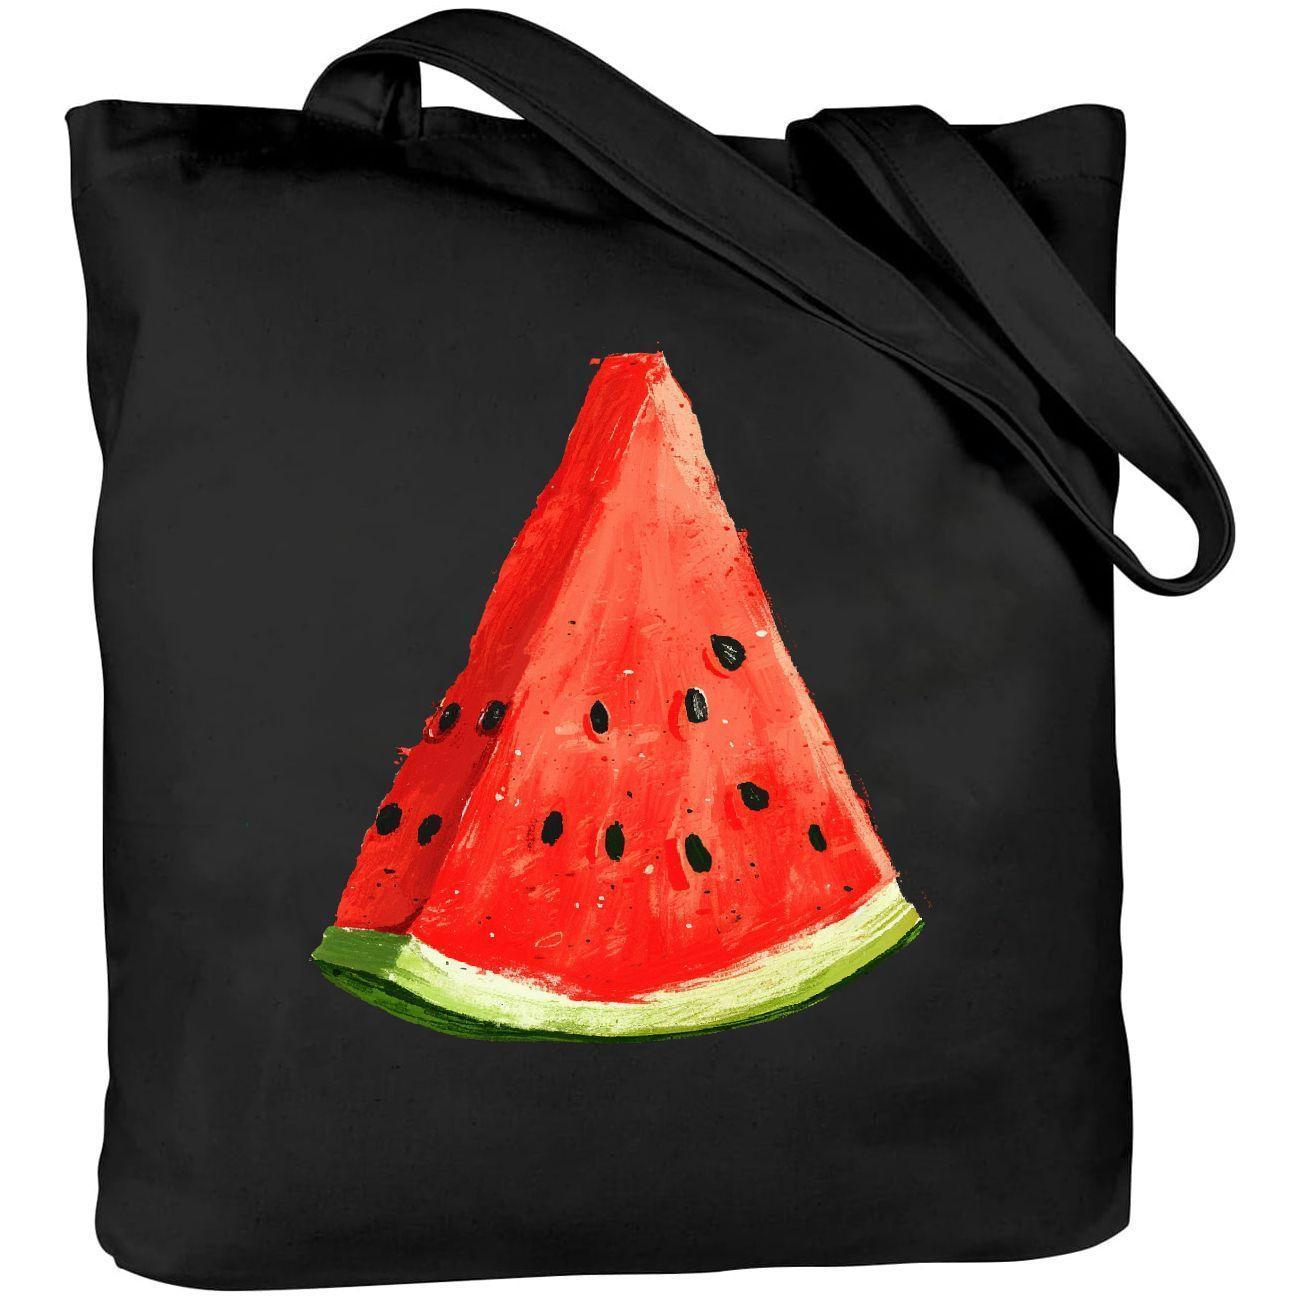 

Watermelon Slice Printed Canvas Tote Bag, Durable Shoulder Bag With Wide Straps, Reusable And Washable Shopping Tote, Summer Fruit Design Bag For Travel & Daily Use